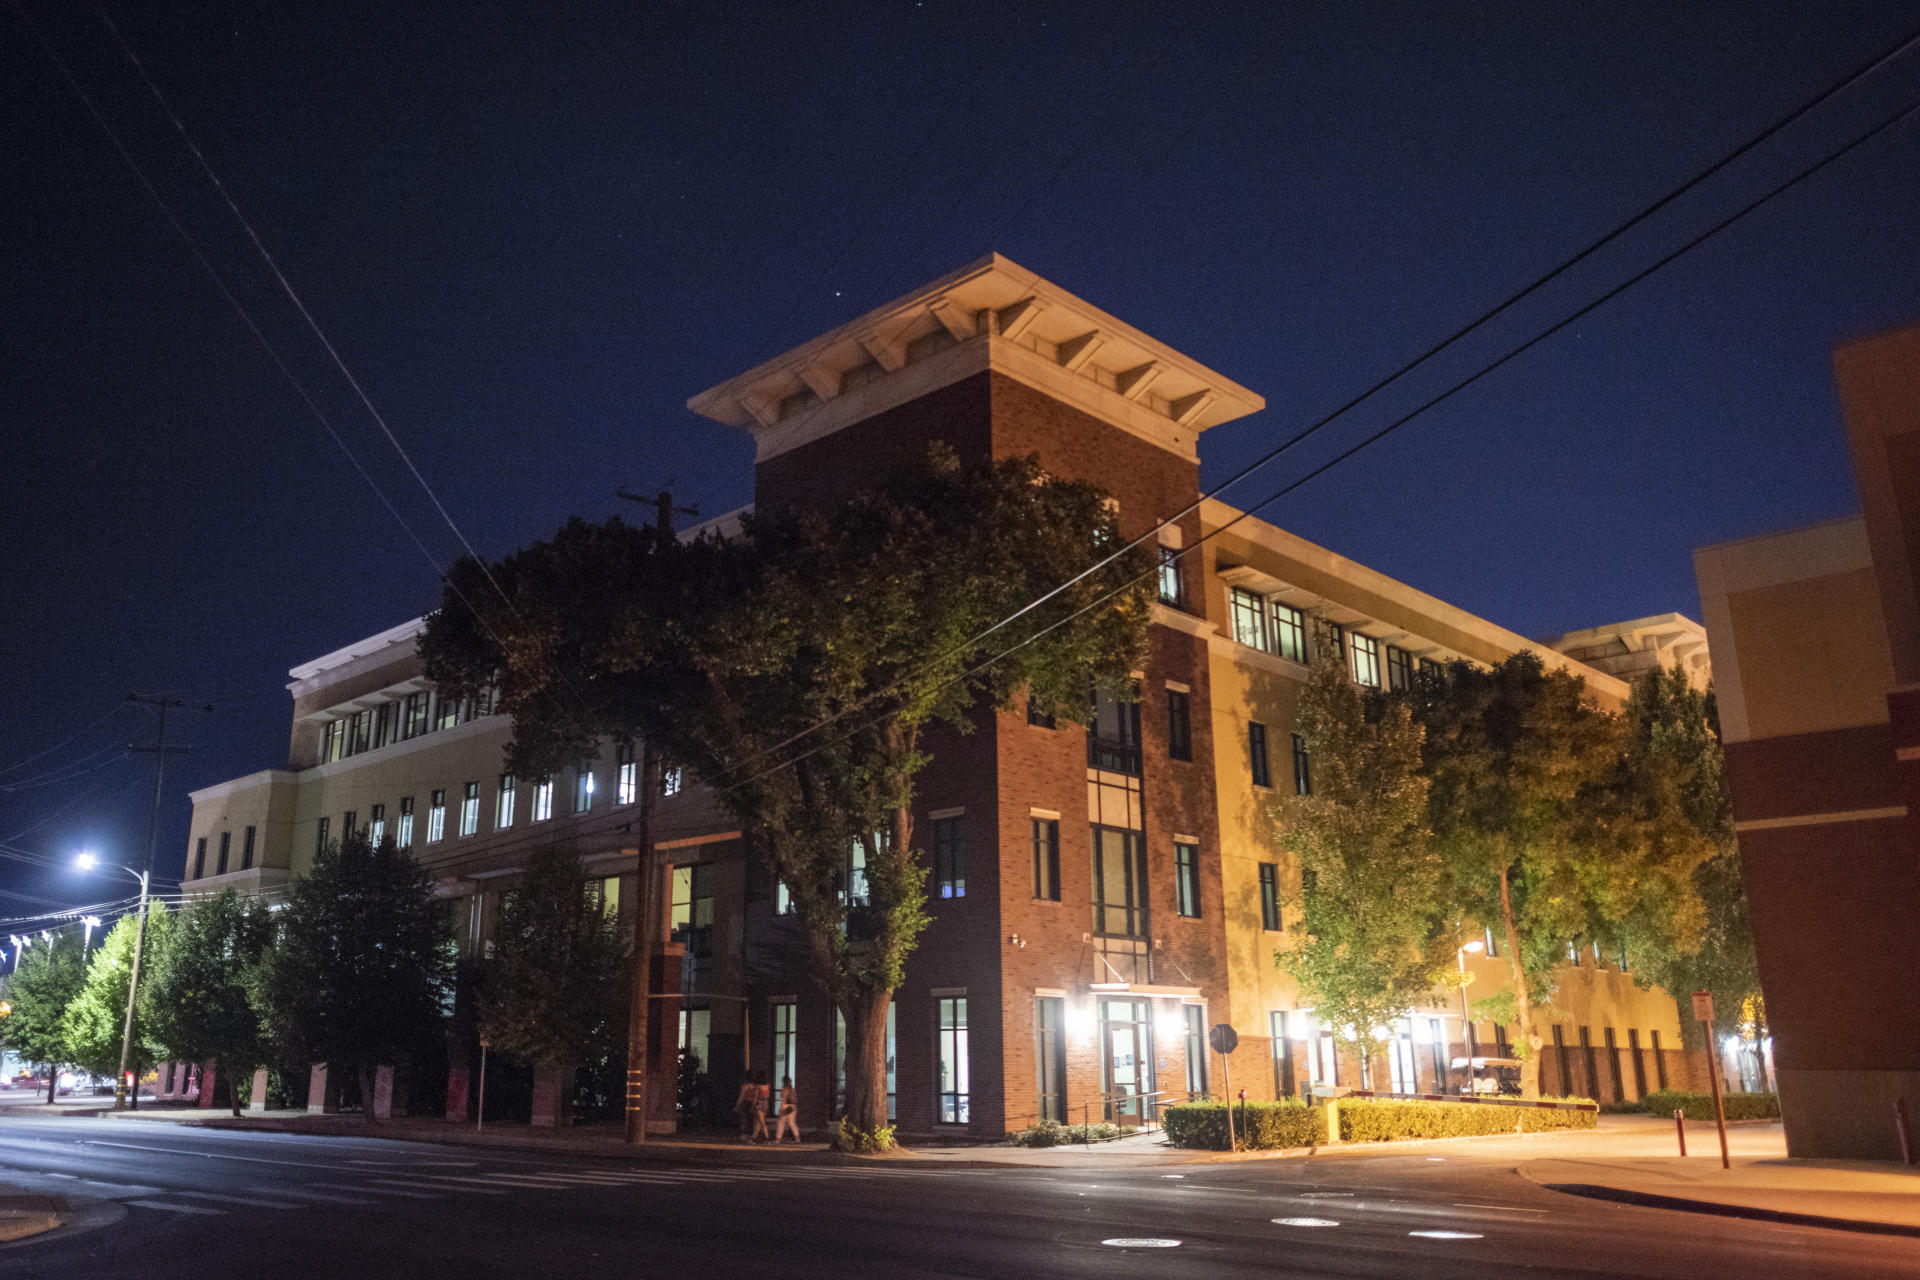 The Student Services Center is photographed at night. Street lights illuminate the walkways around the building.